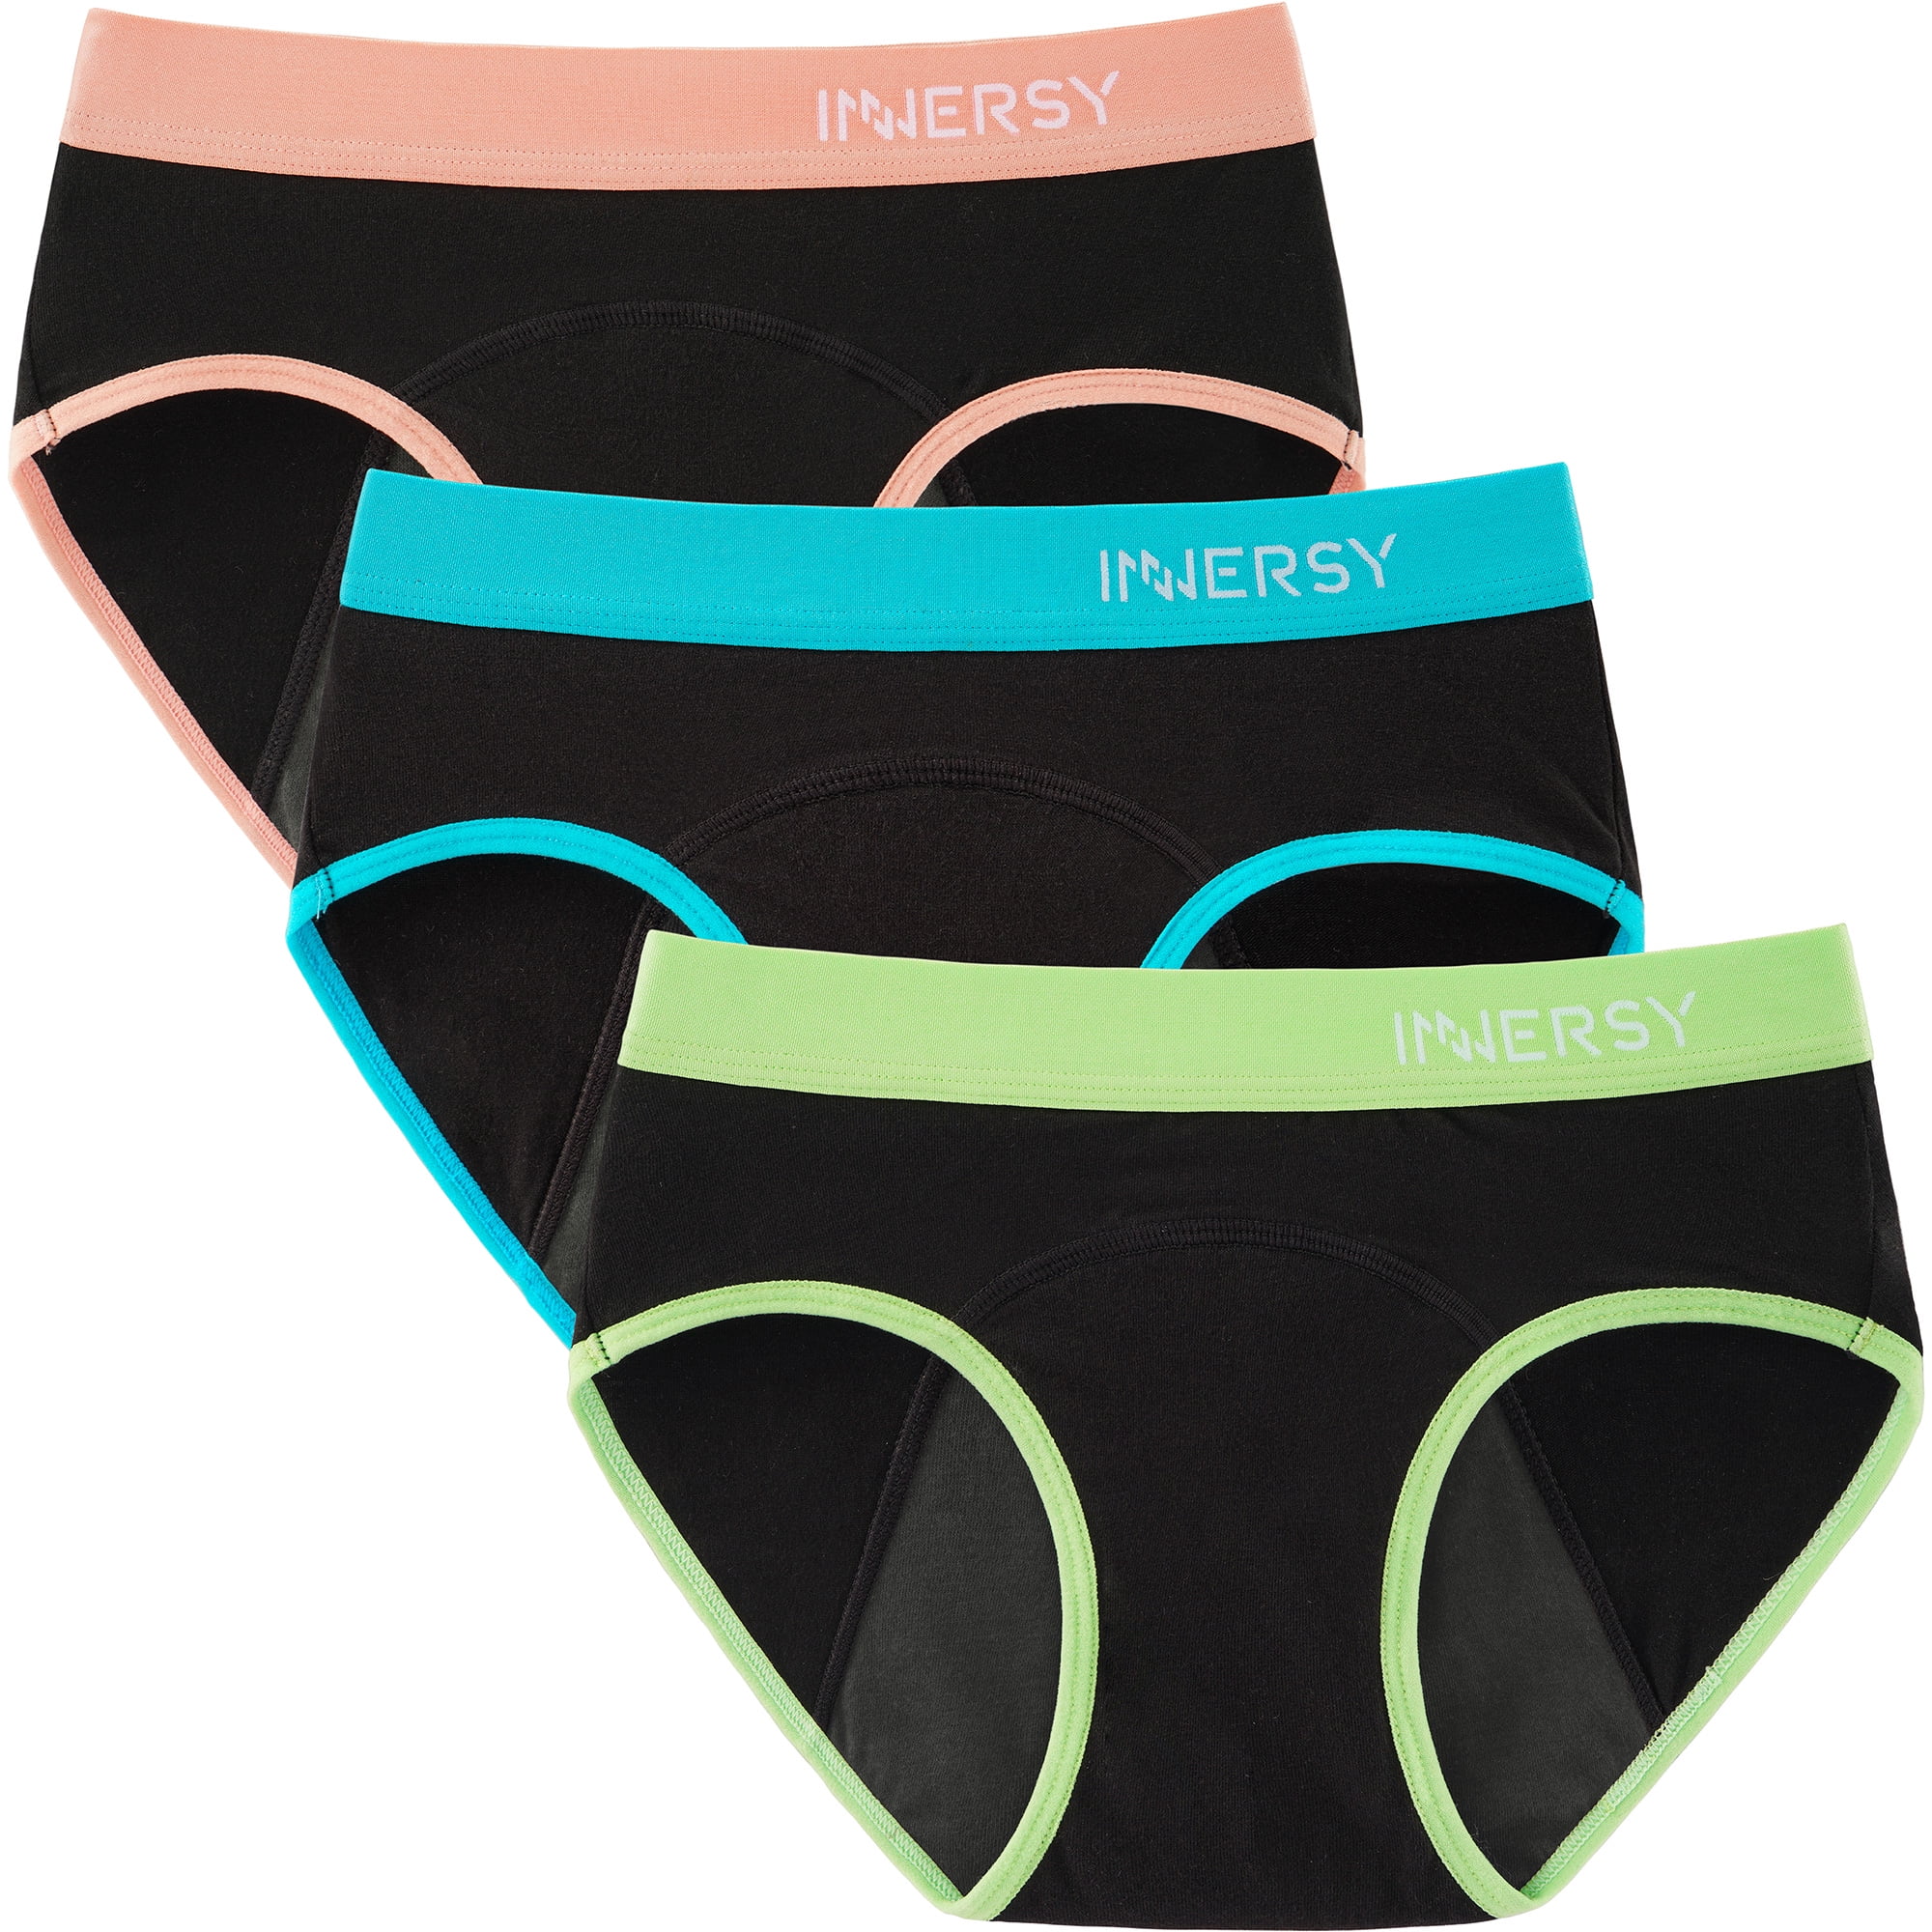 INNERSY Girls' Cotton Menstrual Panties for Period, 3-Pack 